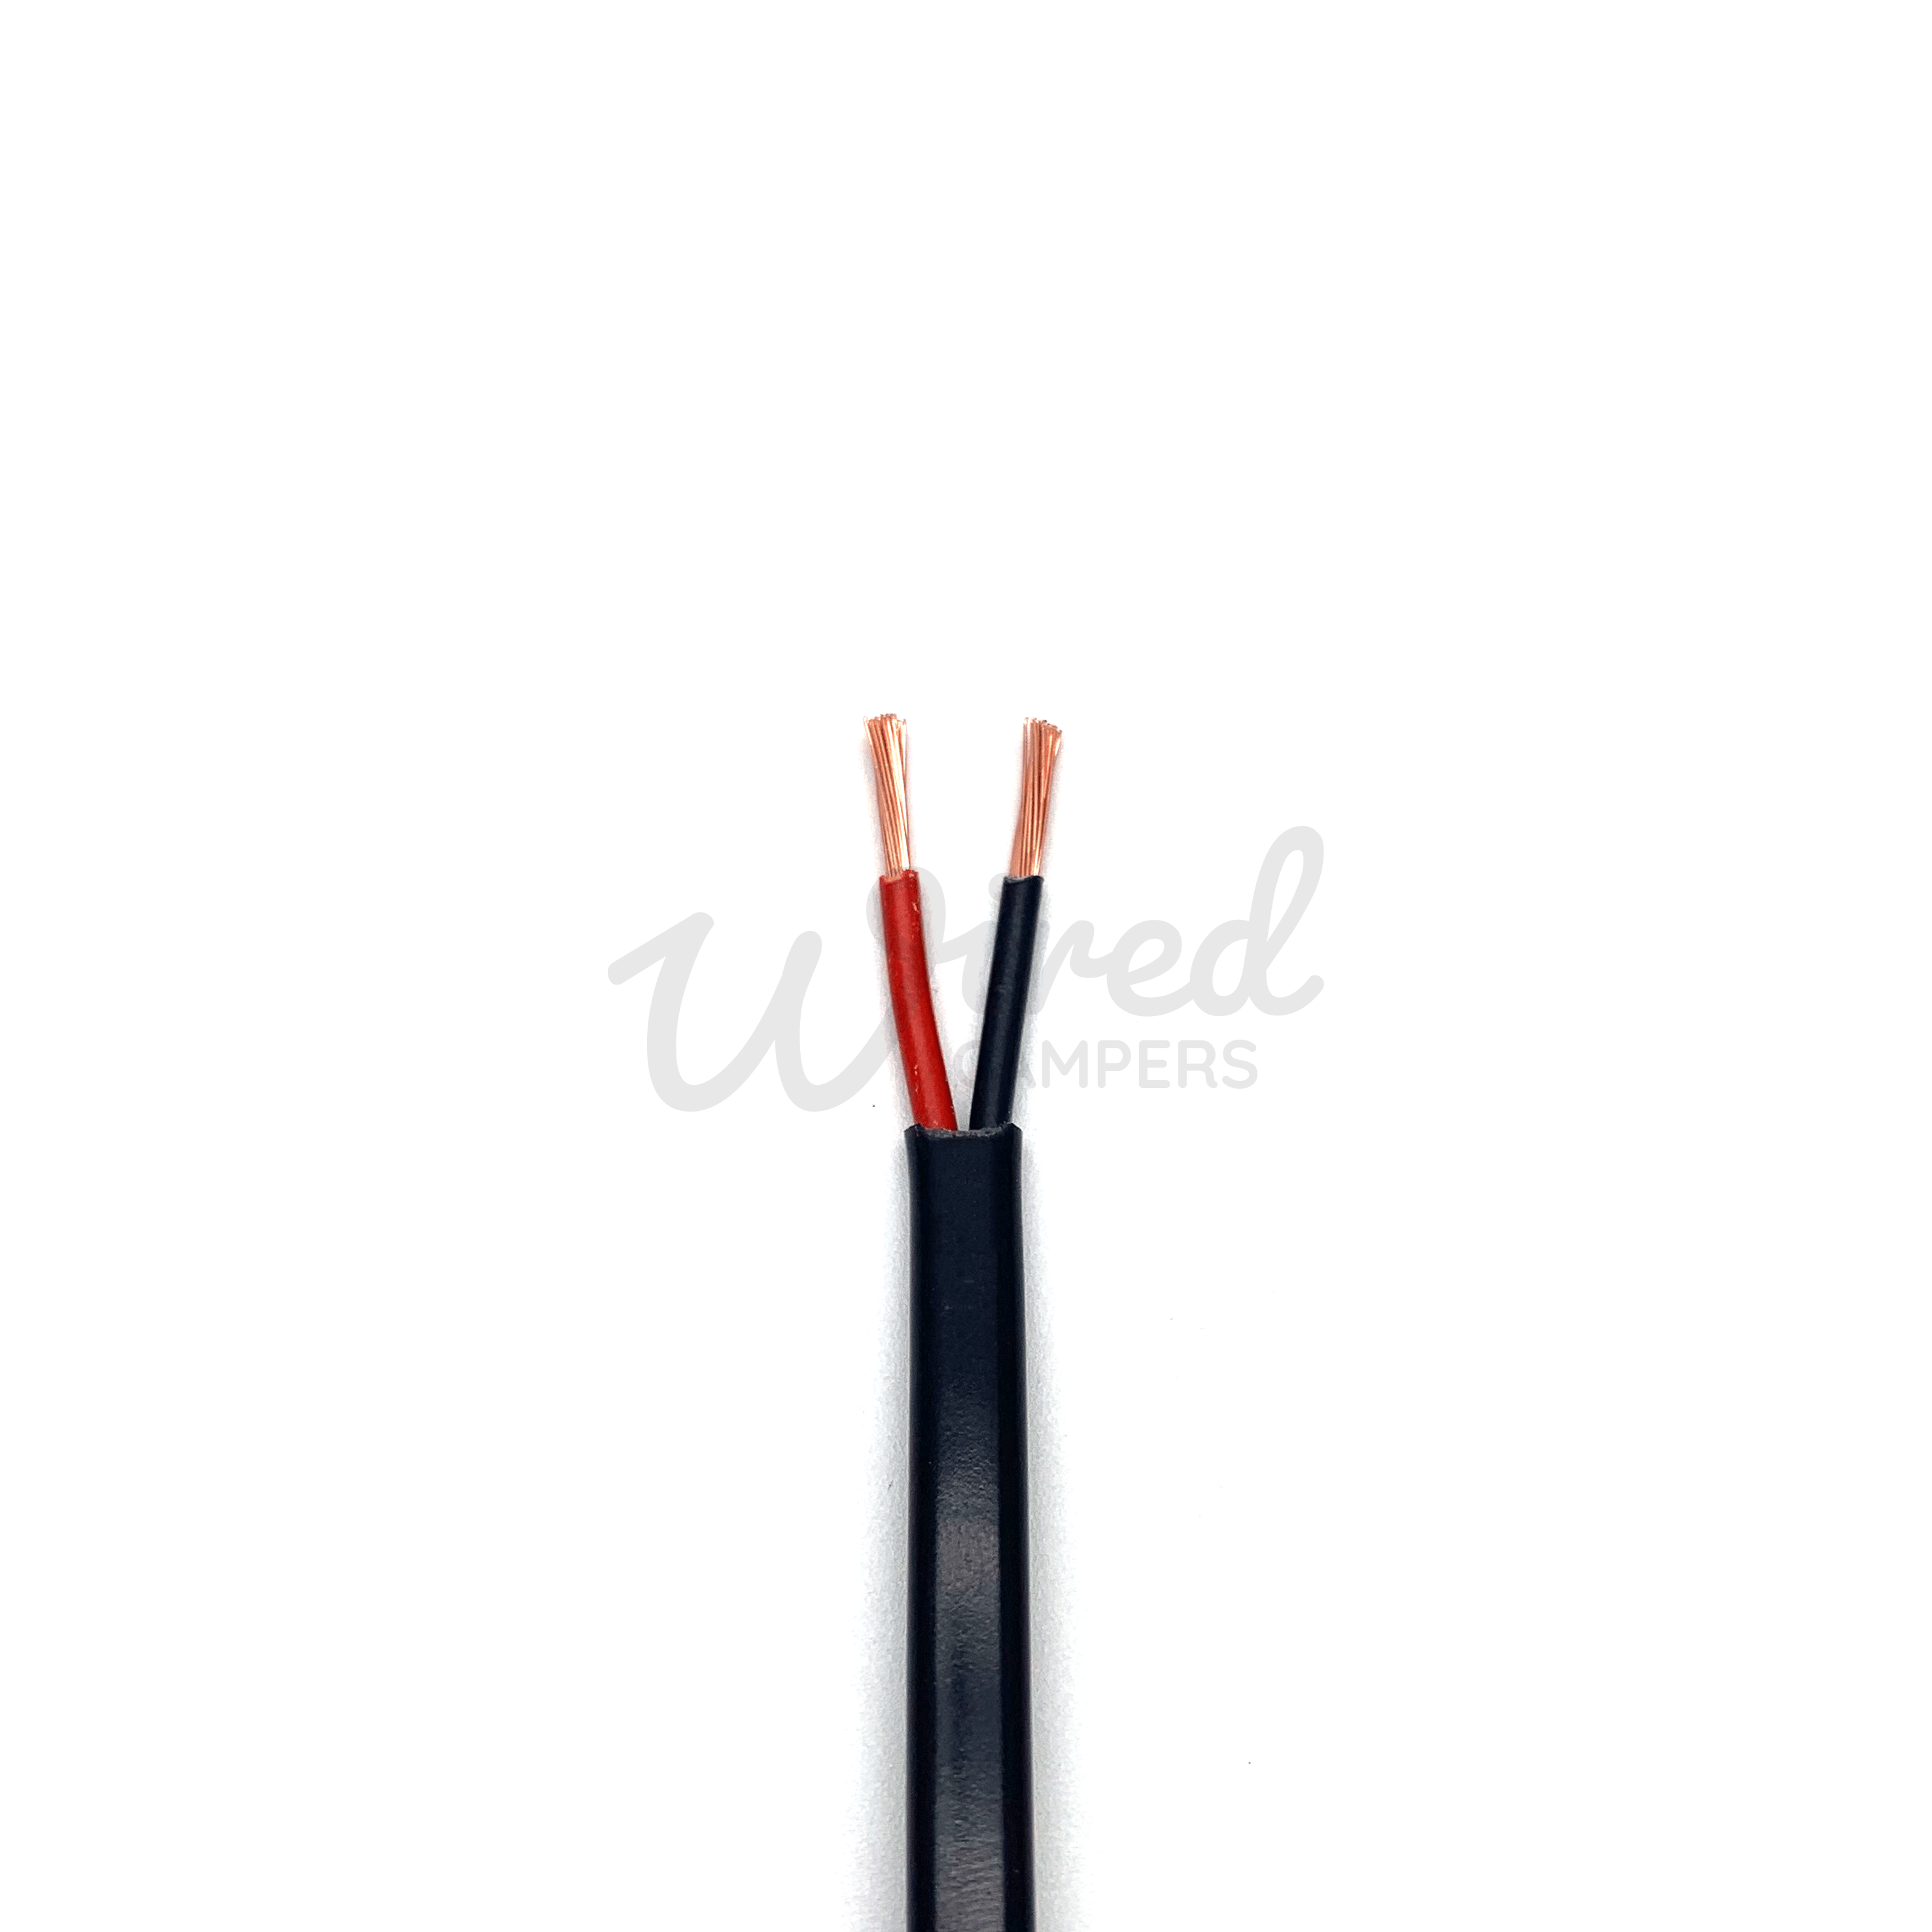 Wired Campers Limited 20M - 1.5mm2 21A Thin Wall Twin Core Flat Automotive Camper Cable